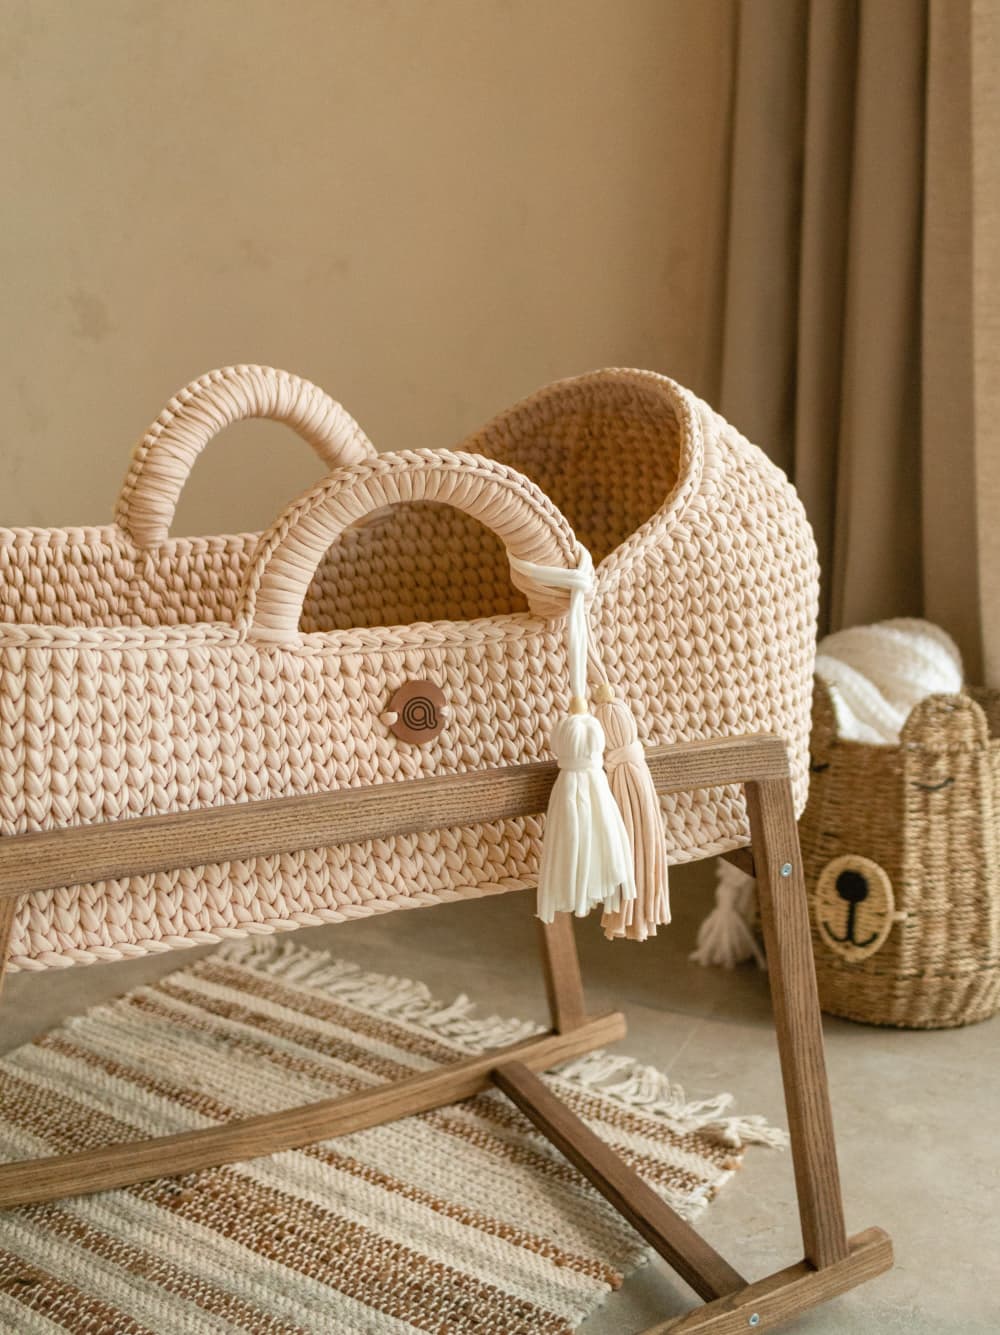  Handmade Baby Moses Basket Bassinet, Beautiful Bed Frame for  Cozy and Safe Sleep : Handmade Products